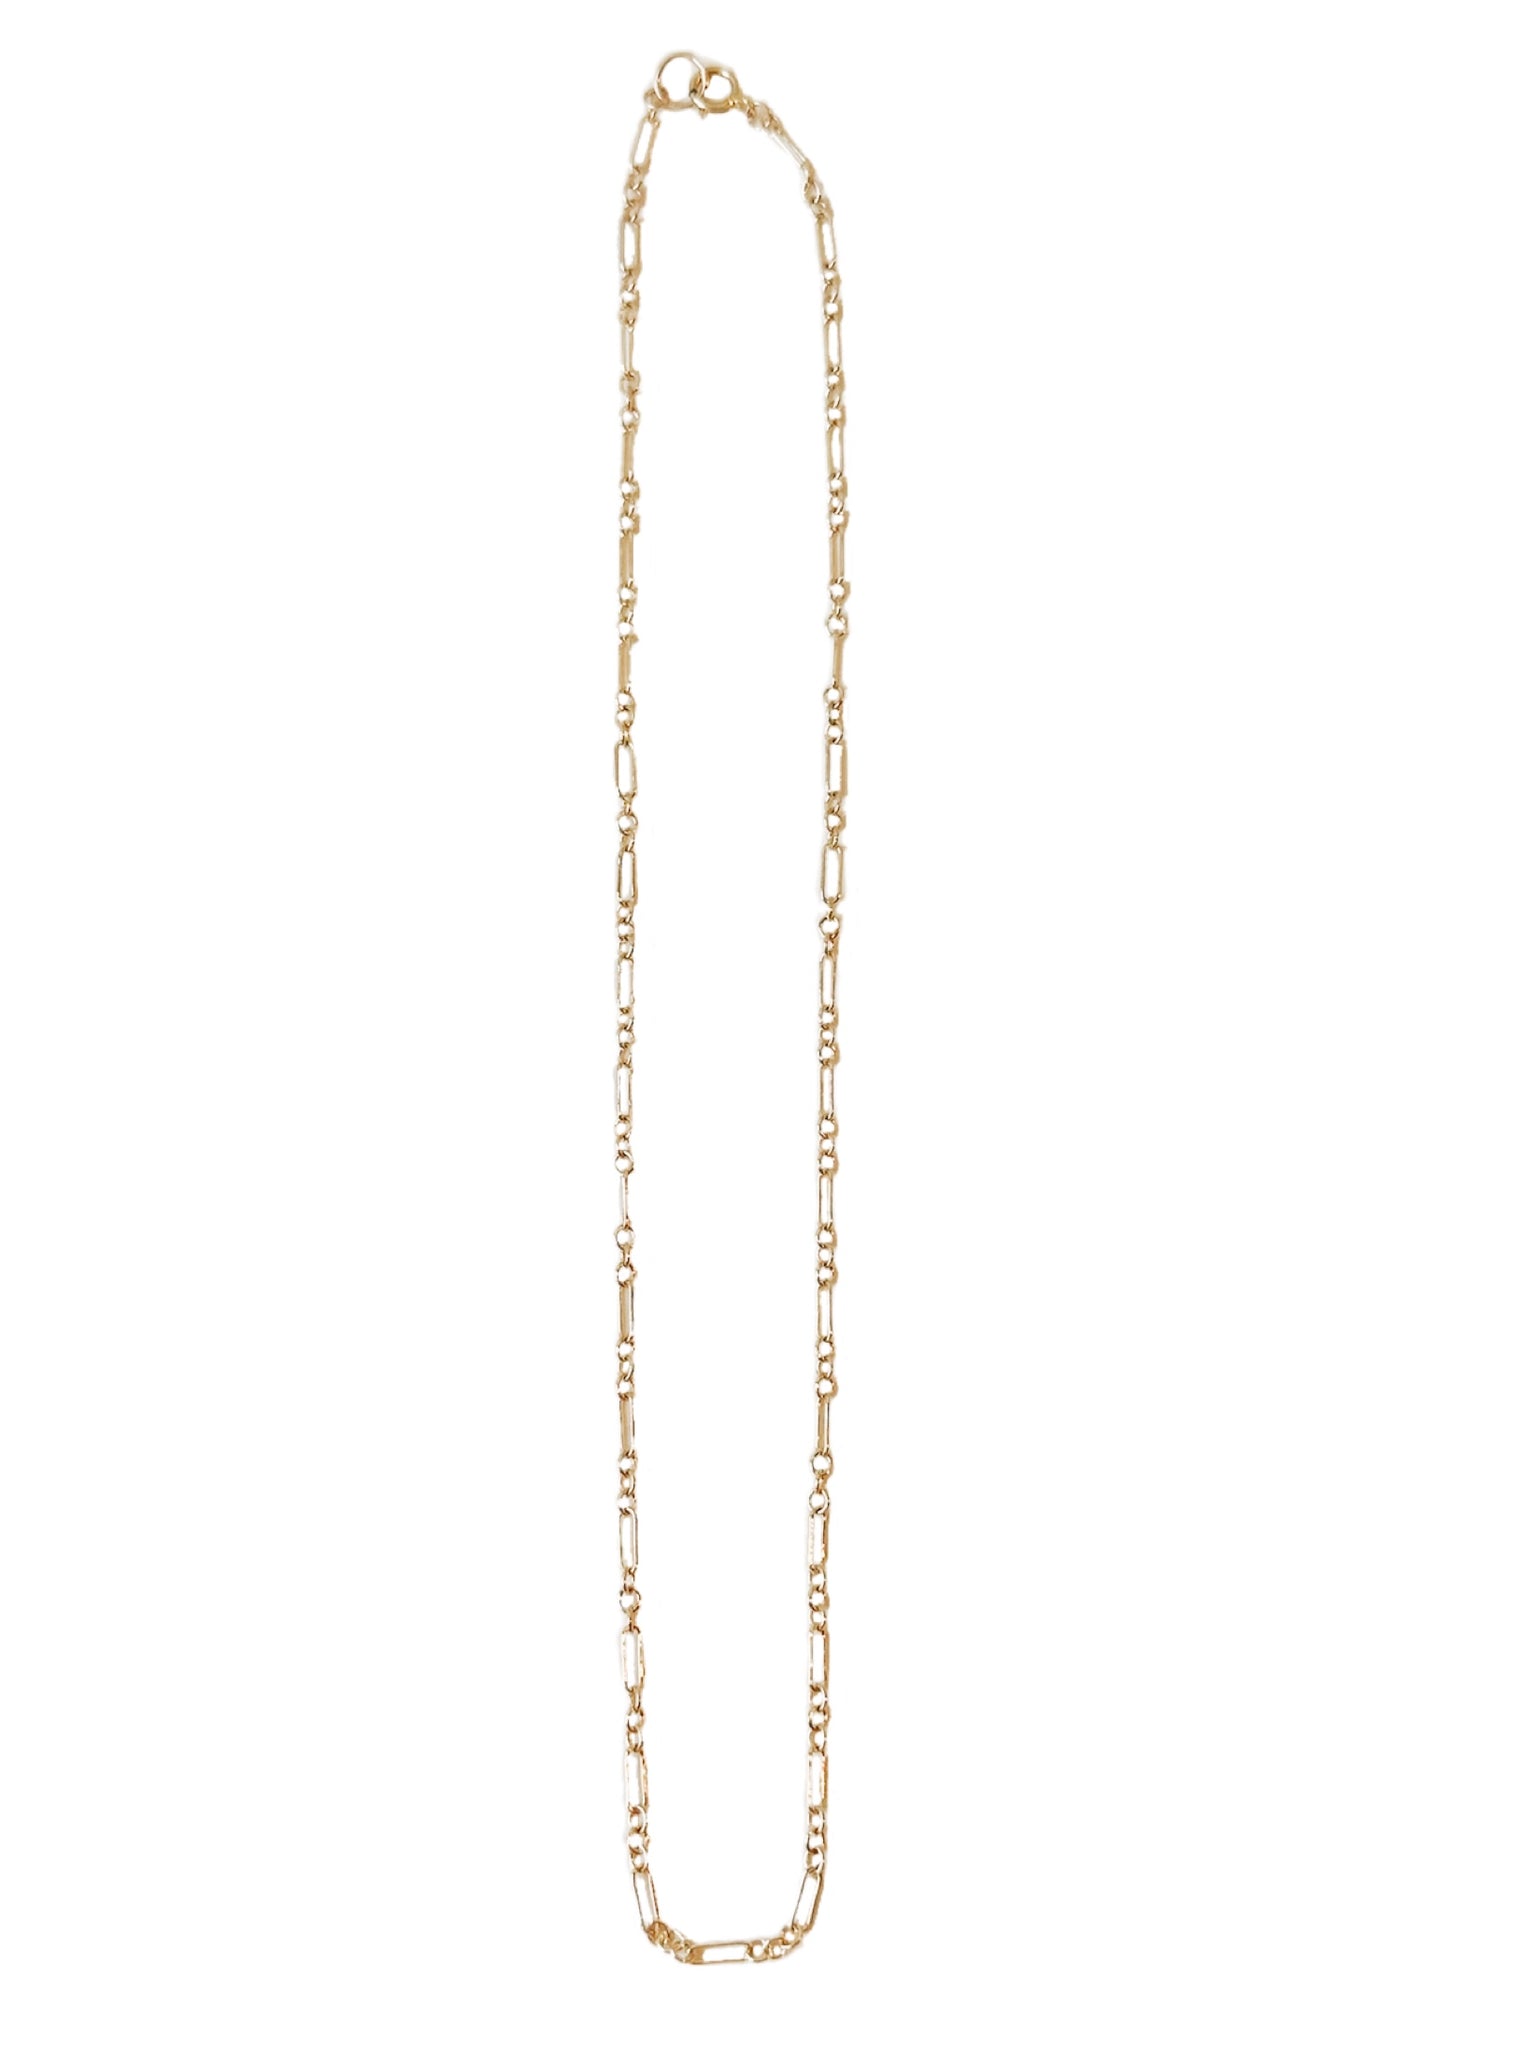 Naples - dainty gold-filled necklace